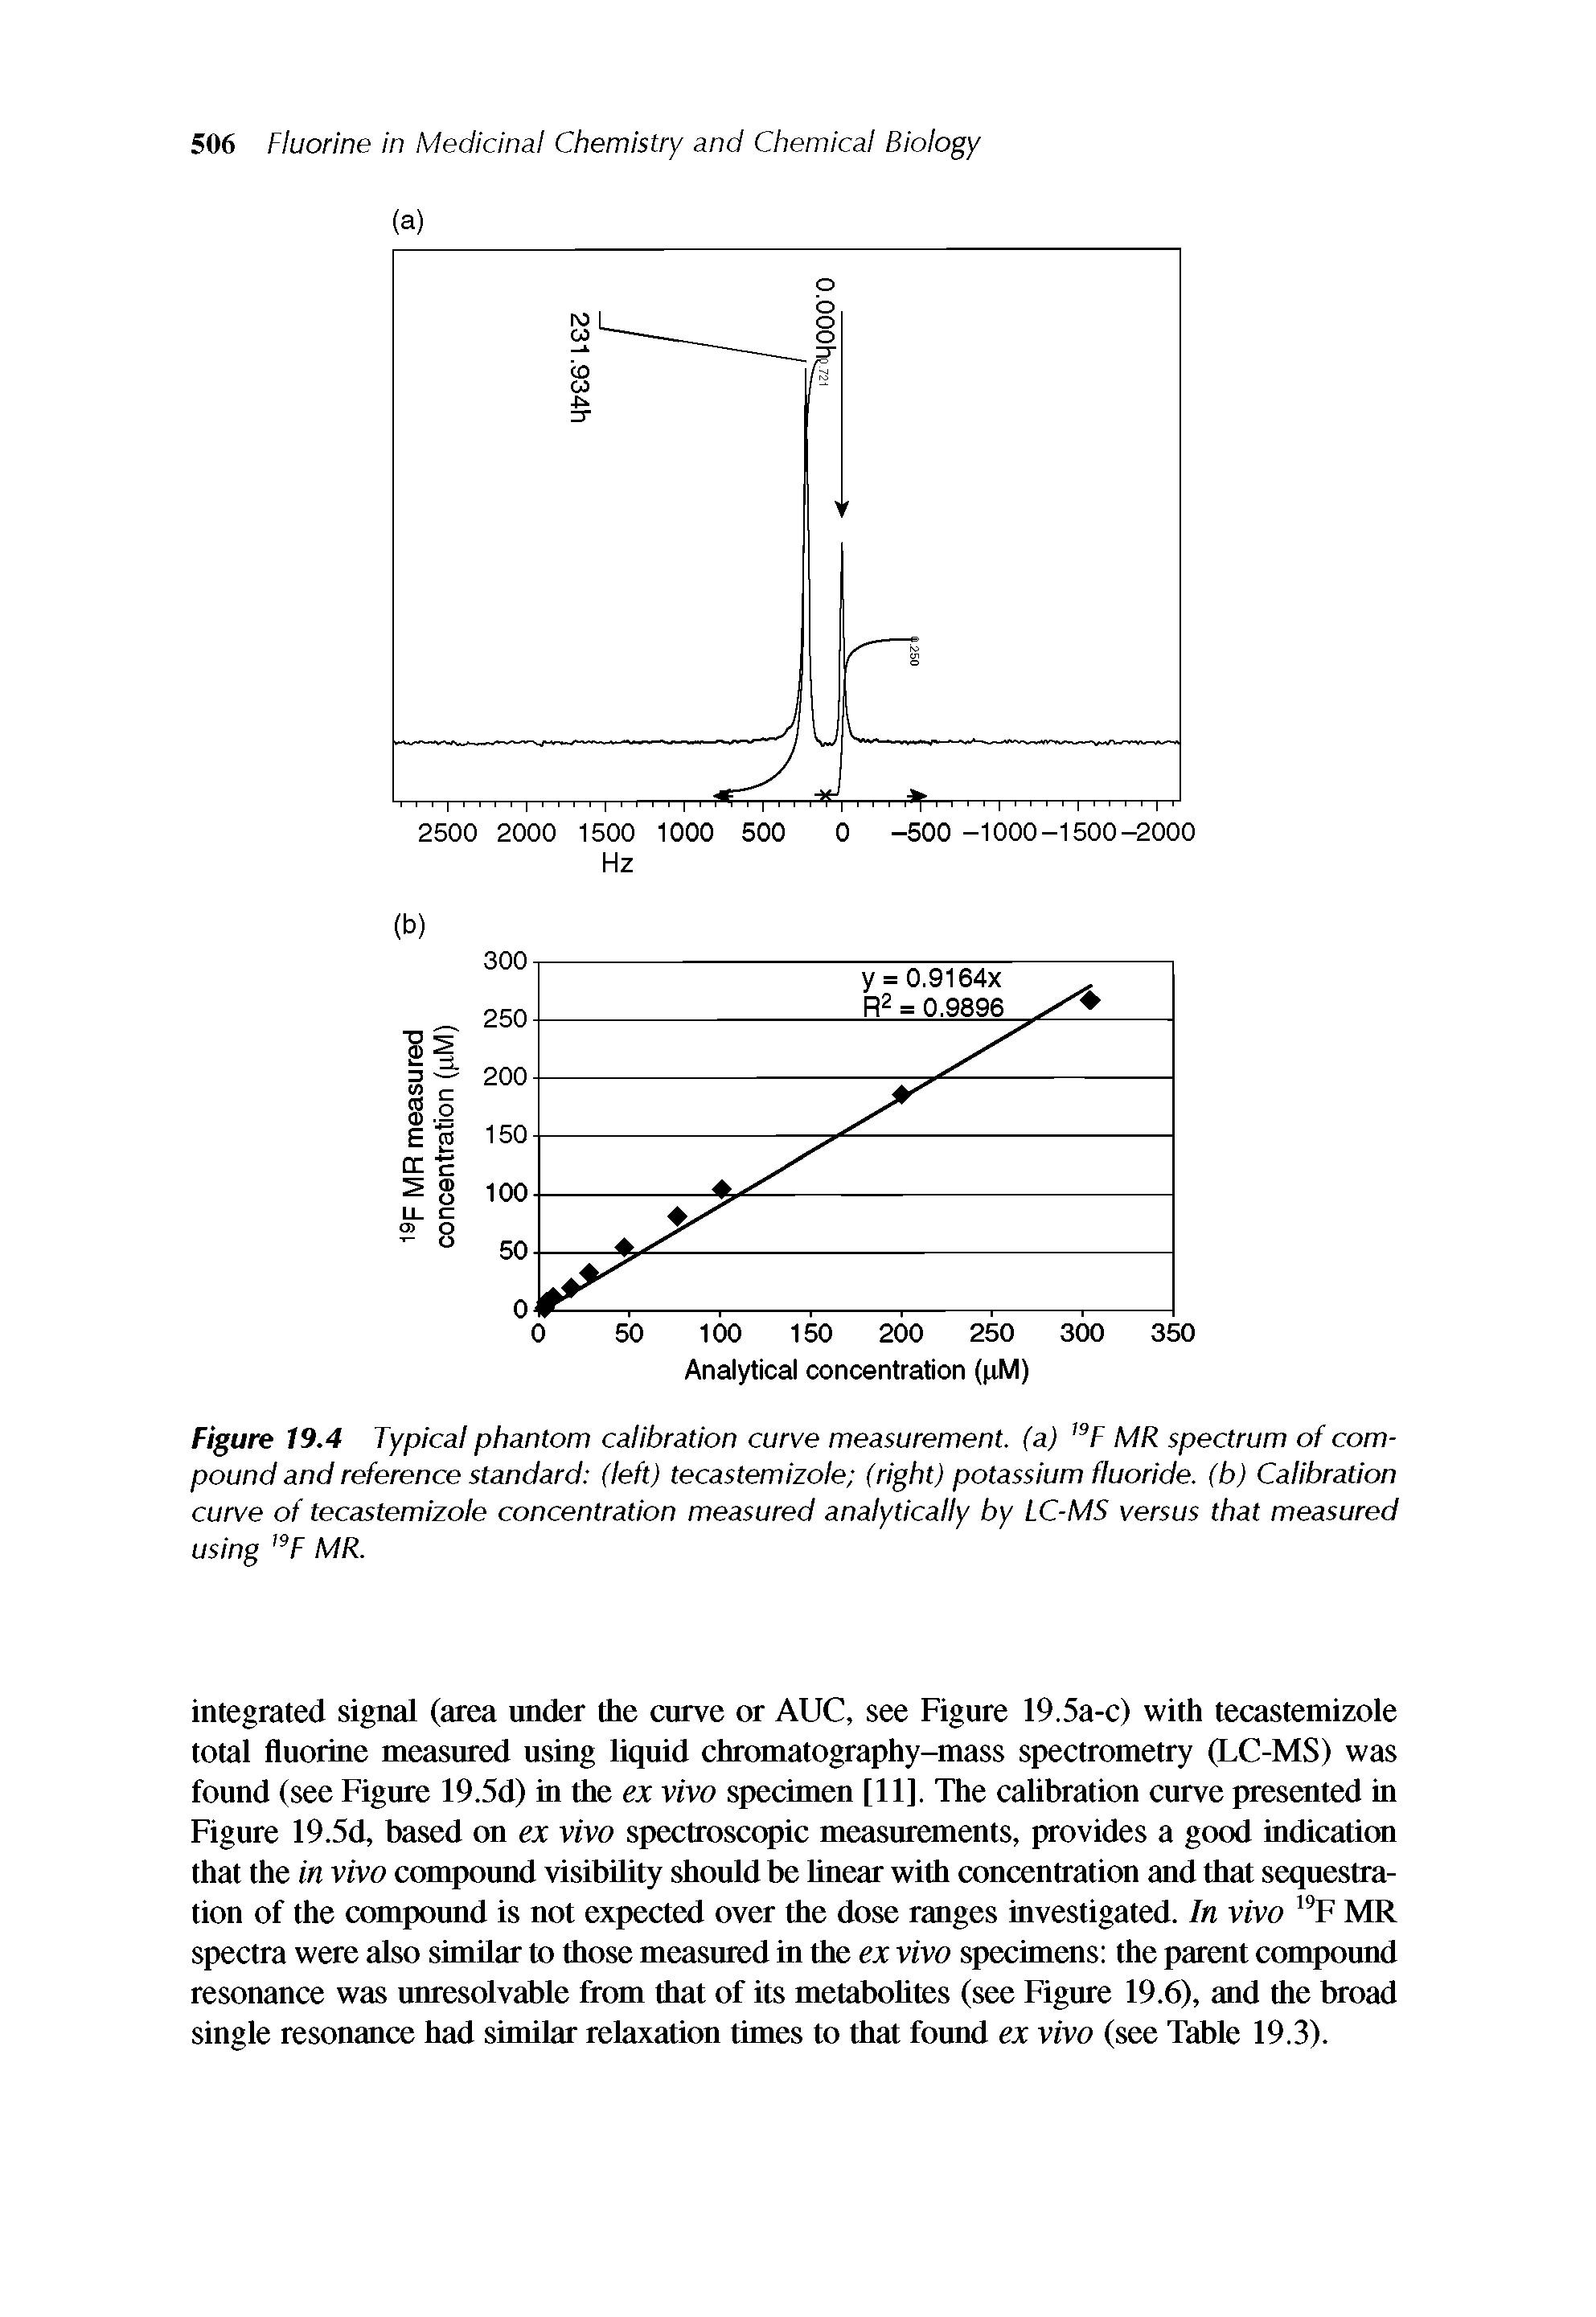 Figure 19.4 Typical phantom calibration curve measurement, (a) 191 MR spectrum of compound and reference standard (left) tecastemizole (right) potassium fluoride, (b) Calibration curve of tecastemizole concentration measured analytically by LC-MS versus that measured using l9F MR.